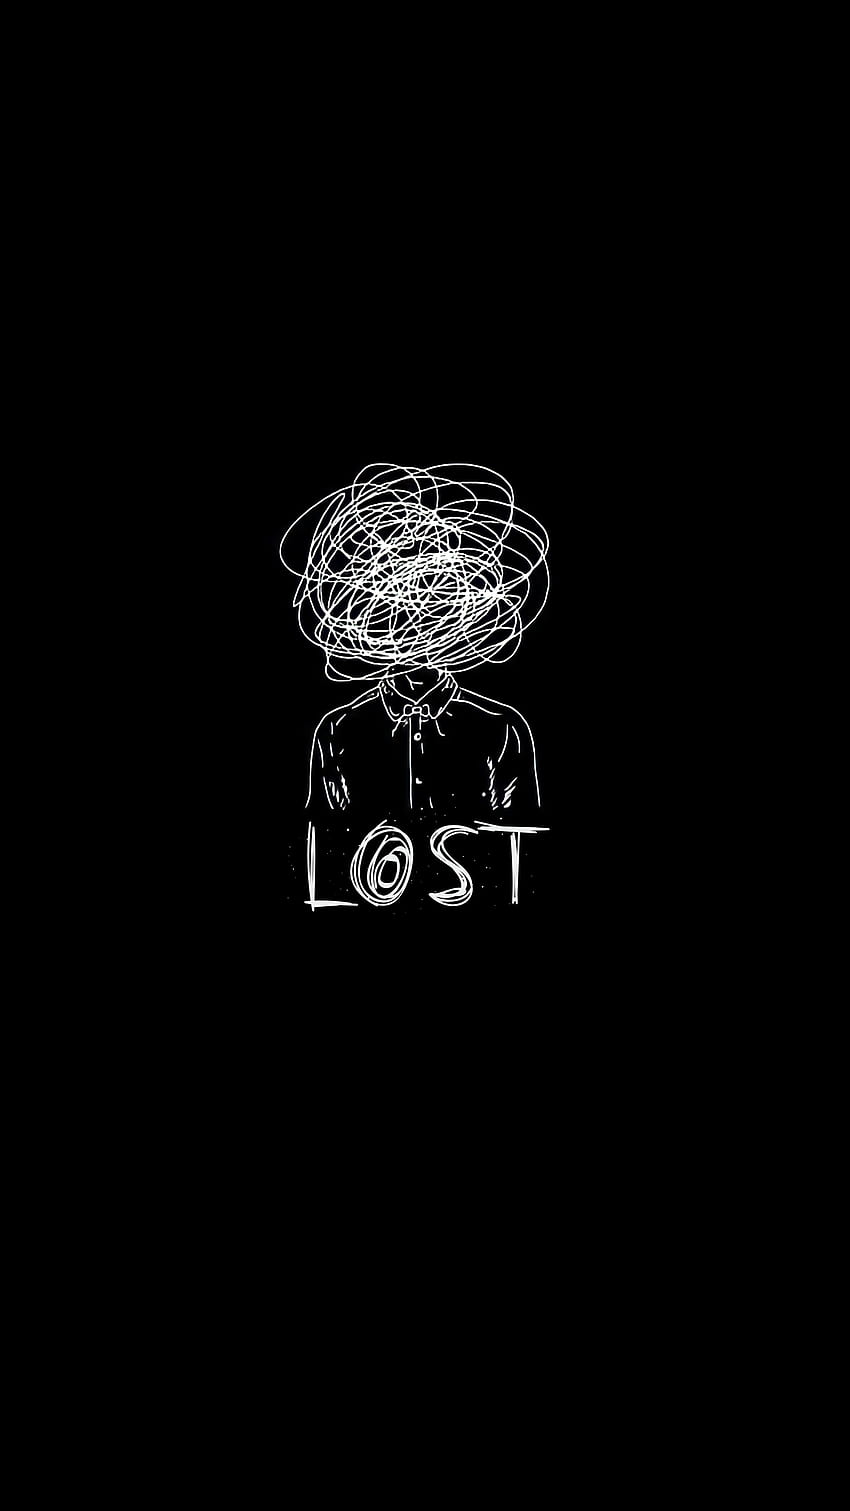 Alone , Lost, Art, Scribble , coolbackgrounds, Iphone, 2022, Cool, Black, Smoke, Sad , Android, Zedge, Dark, Happynewyear, Sad, Scribbles, ipad, iphone backgrounds HD phone wallpaper